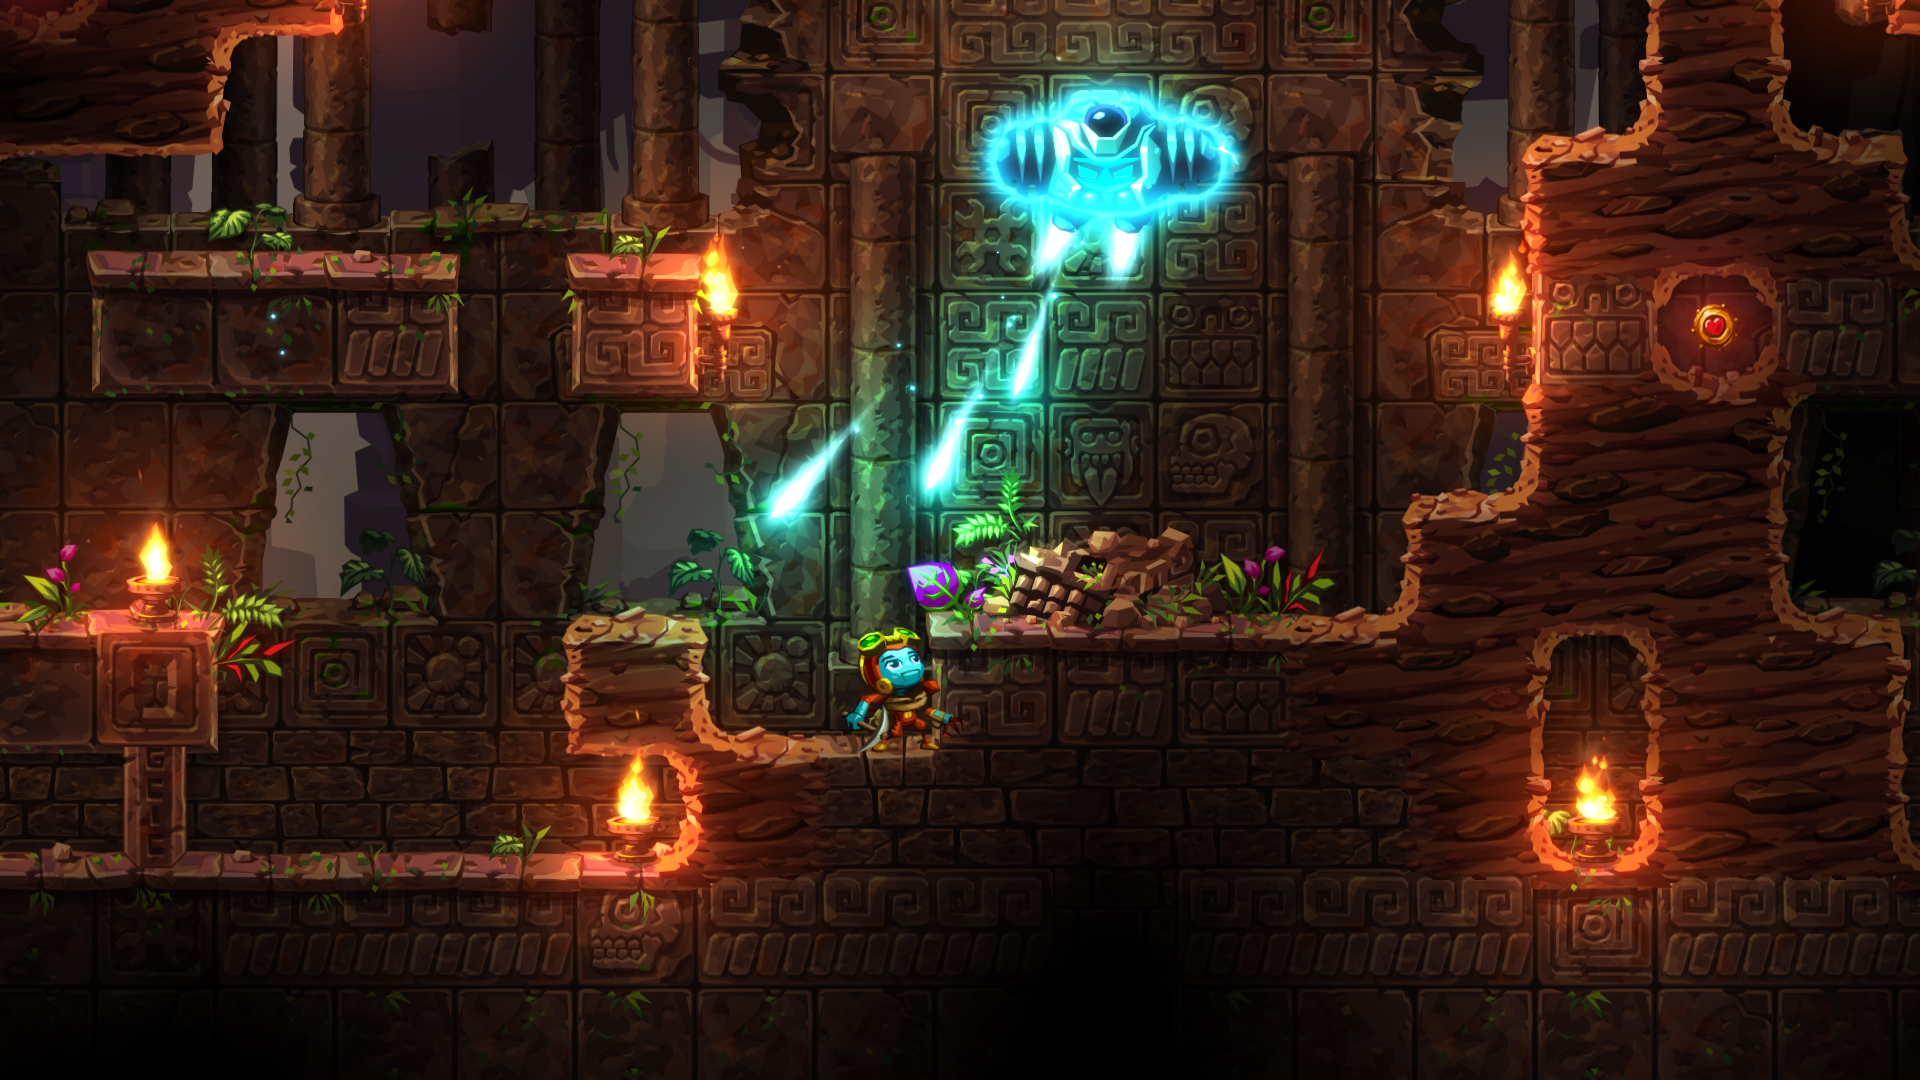 HD desktop wallpaper and background of SteamWorld Dig 2, featuring a character mining in an underground setting with a glowing enemy and torches.